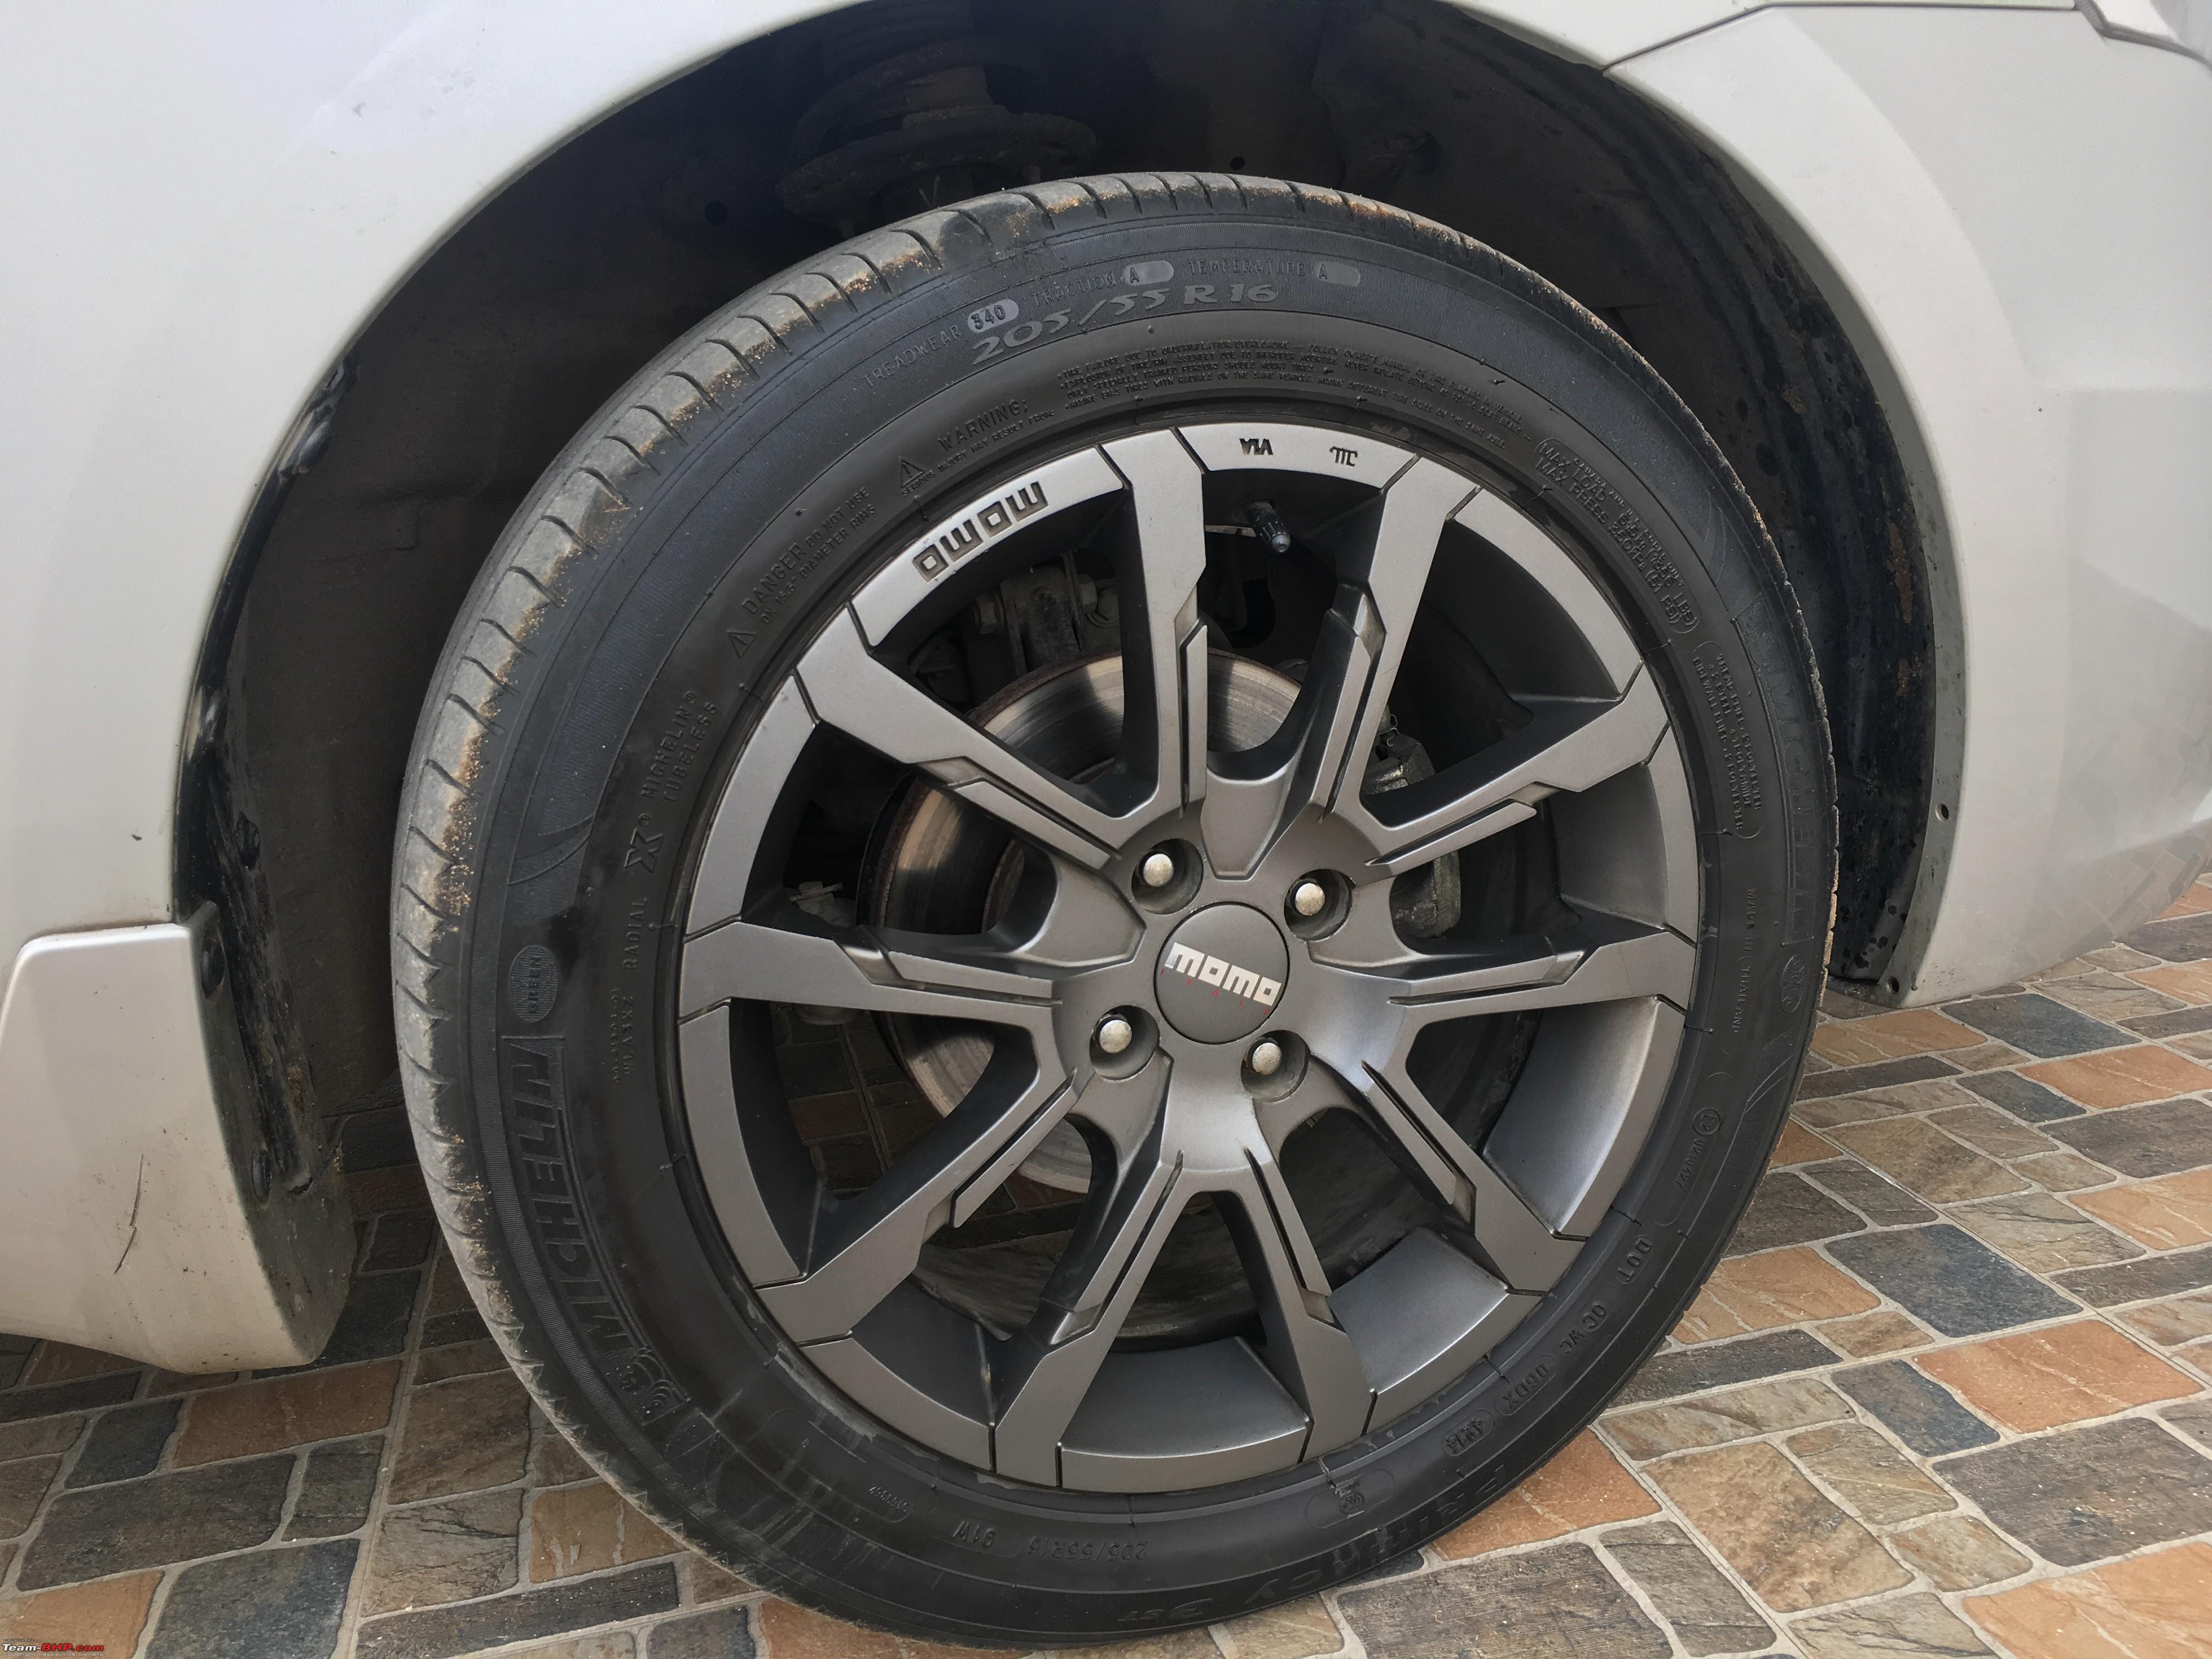 Swift Vxi Alloy Wheel, 15 inch at Rs 28000/set in Bengaluru